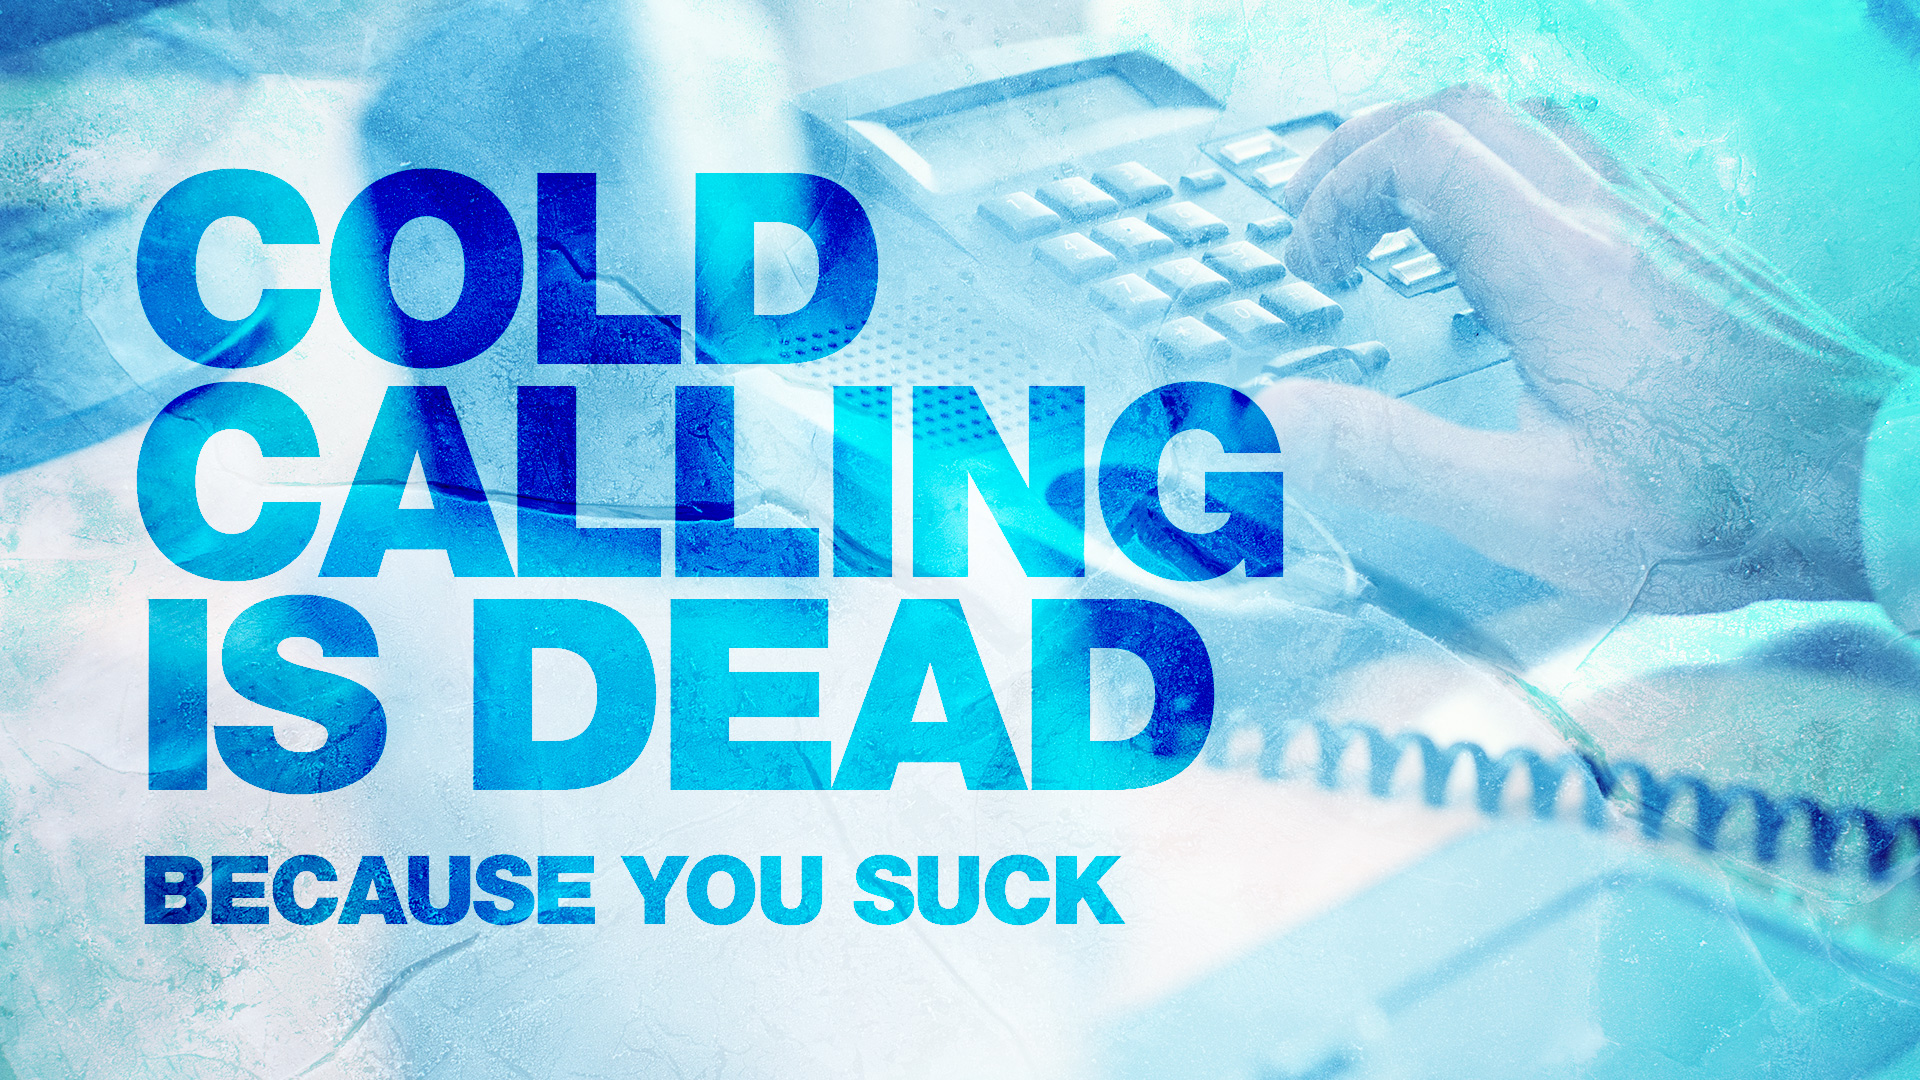 Колд колл. Cold Callers. Cold Call advantages. Cold sales. Cold calling stock.